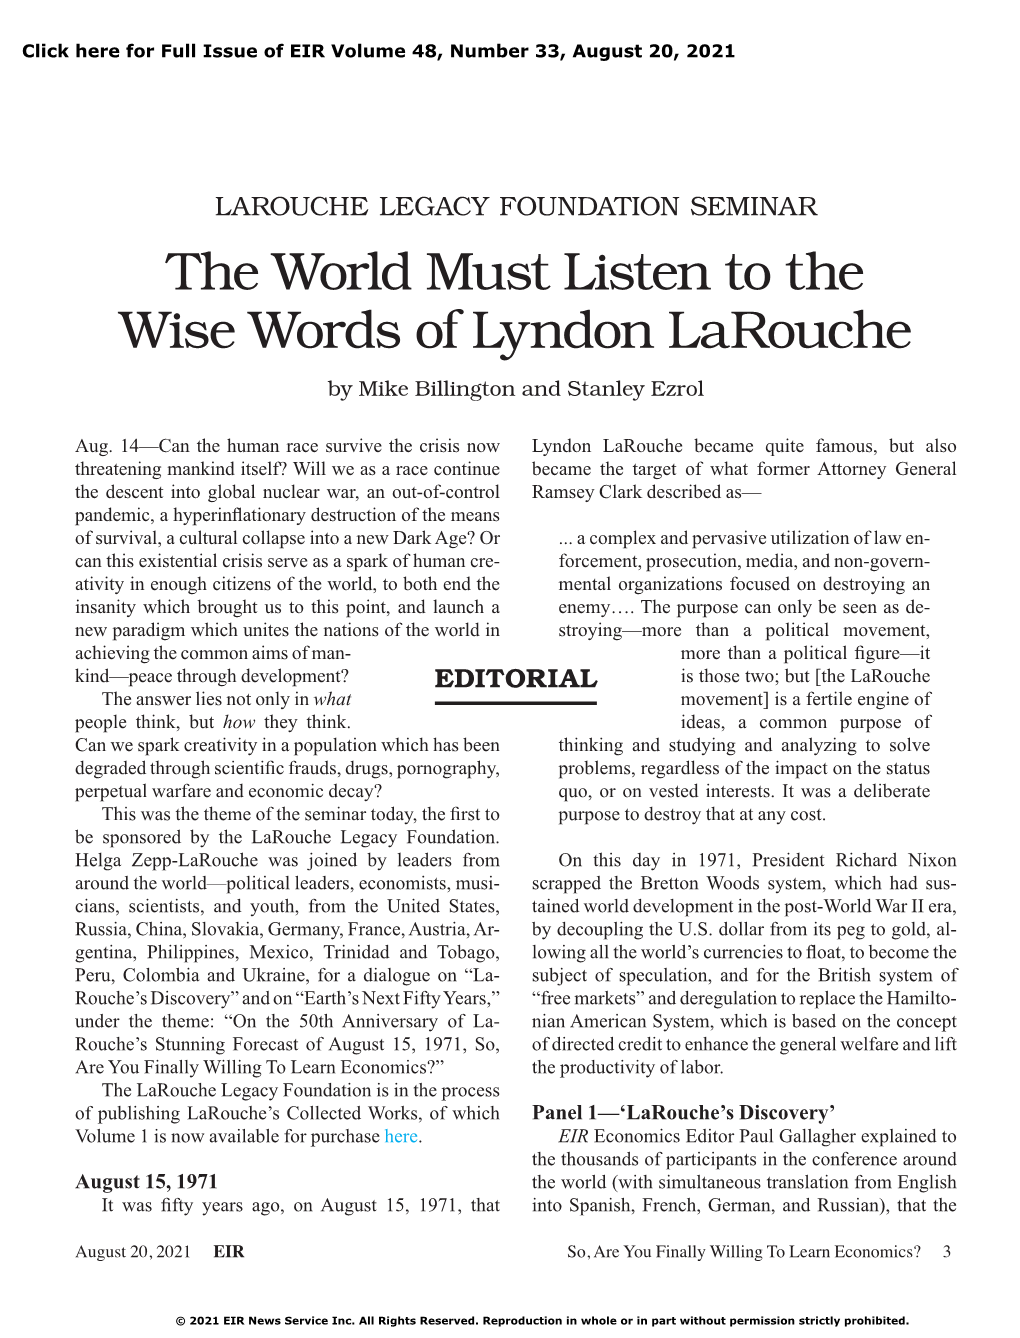 The World Must Listen to the Wise Words of Lyndon Larouche by Mike Billington and Stanley Ezrol